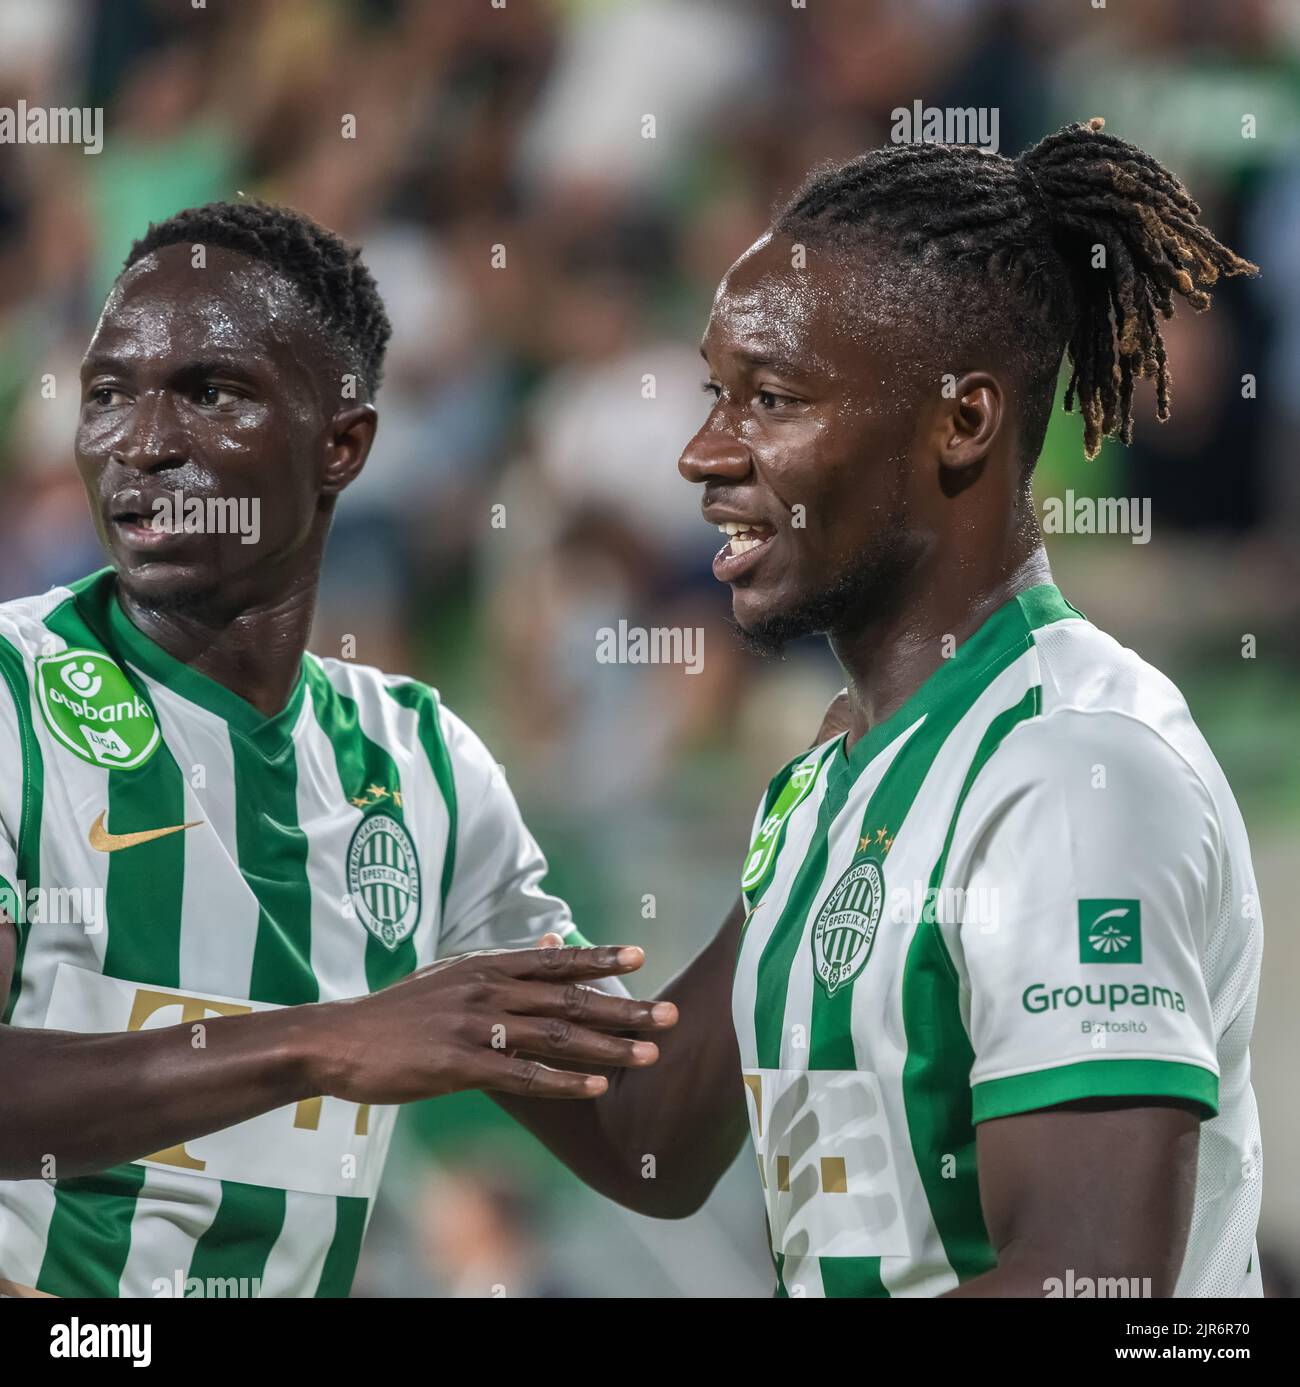 Budapest, Hungary – July 13, 2022. Ferencvaros players Adama Traore and Fortune Bassey celebrating Bassey’s goal in UEFA Champions League qualificatio Stock Photo